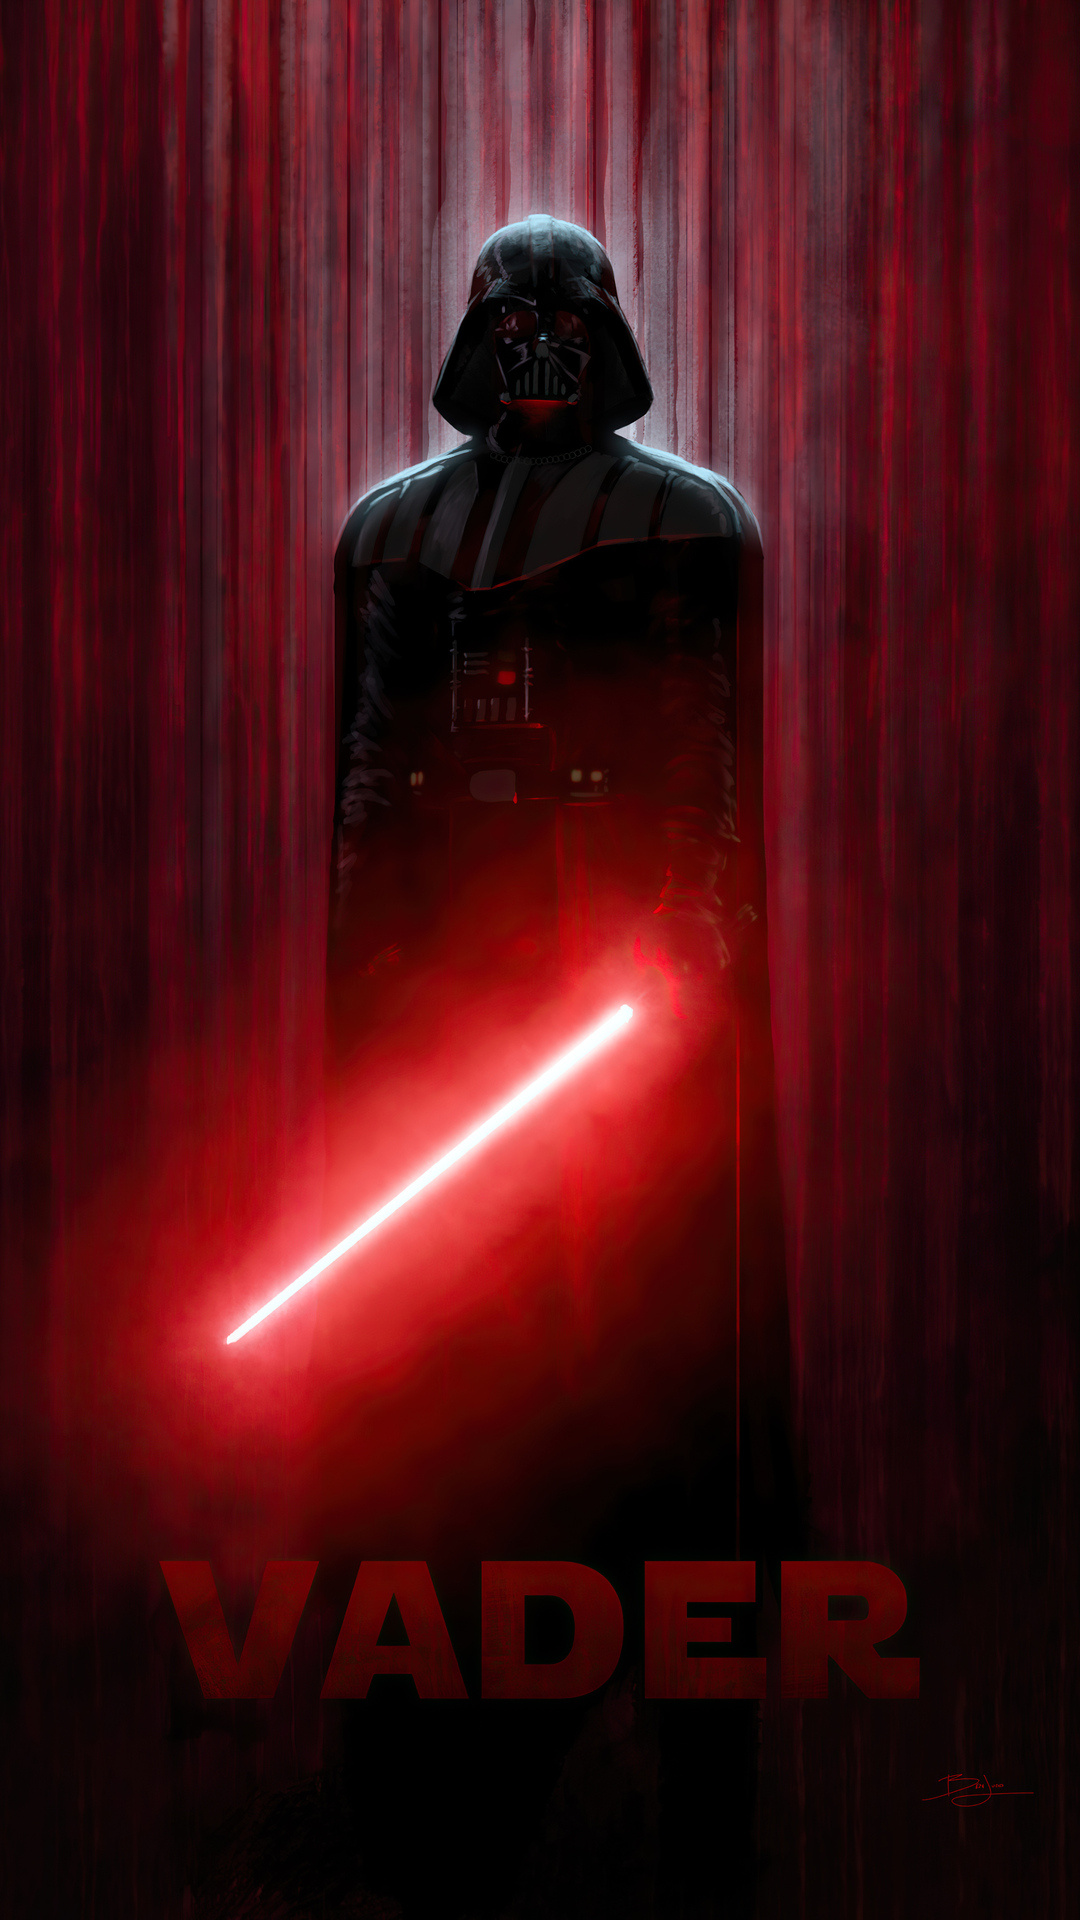 Darth Vader: The prophesied Chosen One of the Jedi Order, destined to bring balance to the Force. 1080x1920 Full HD Background.